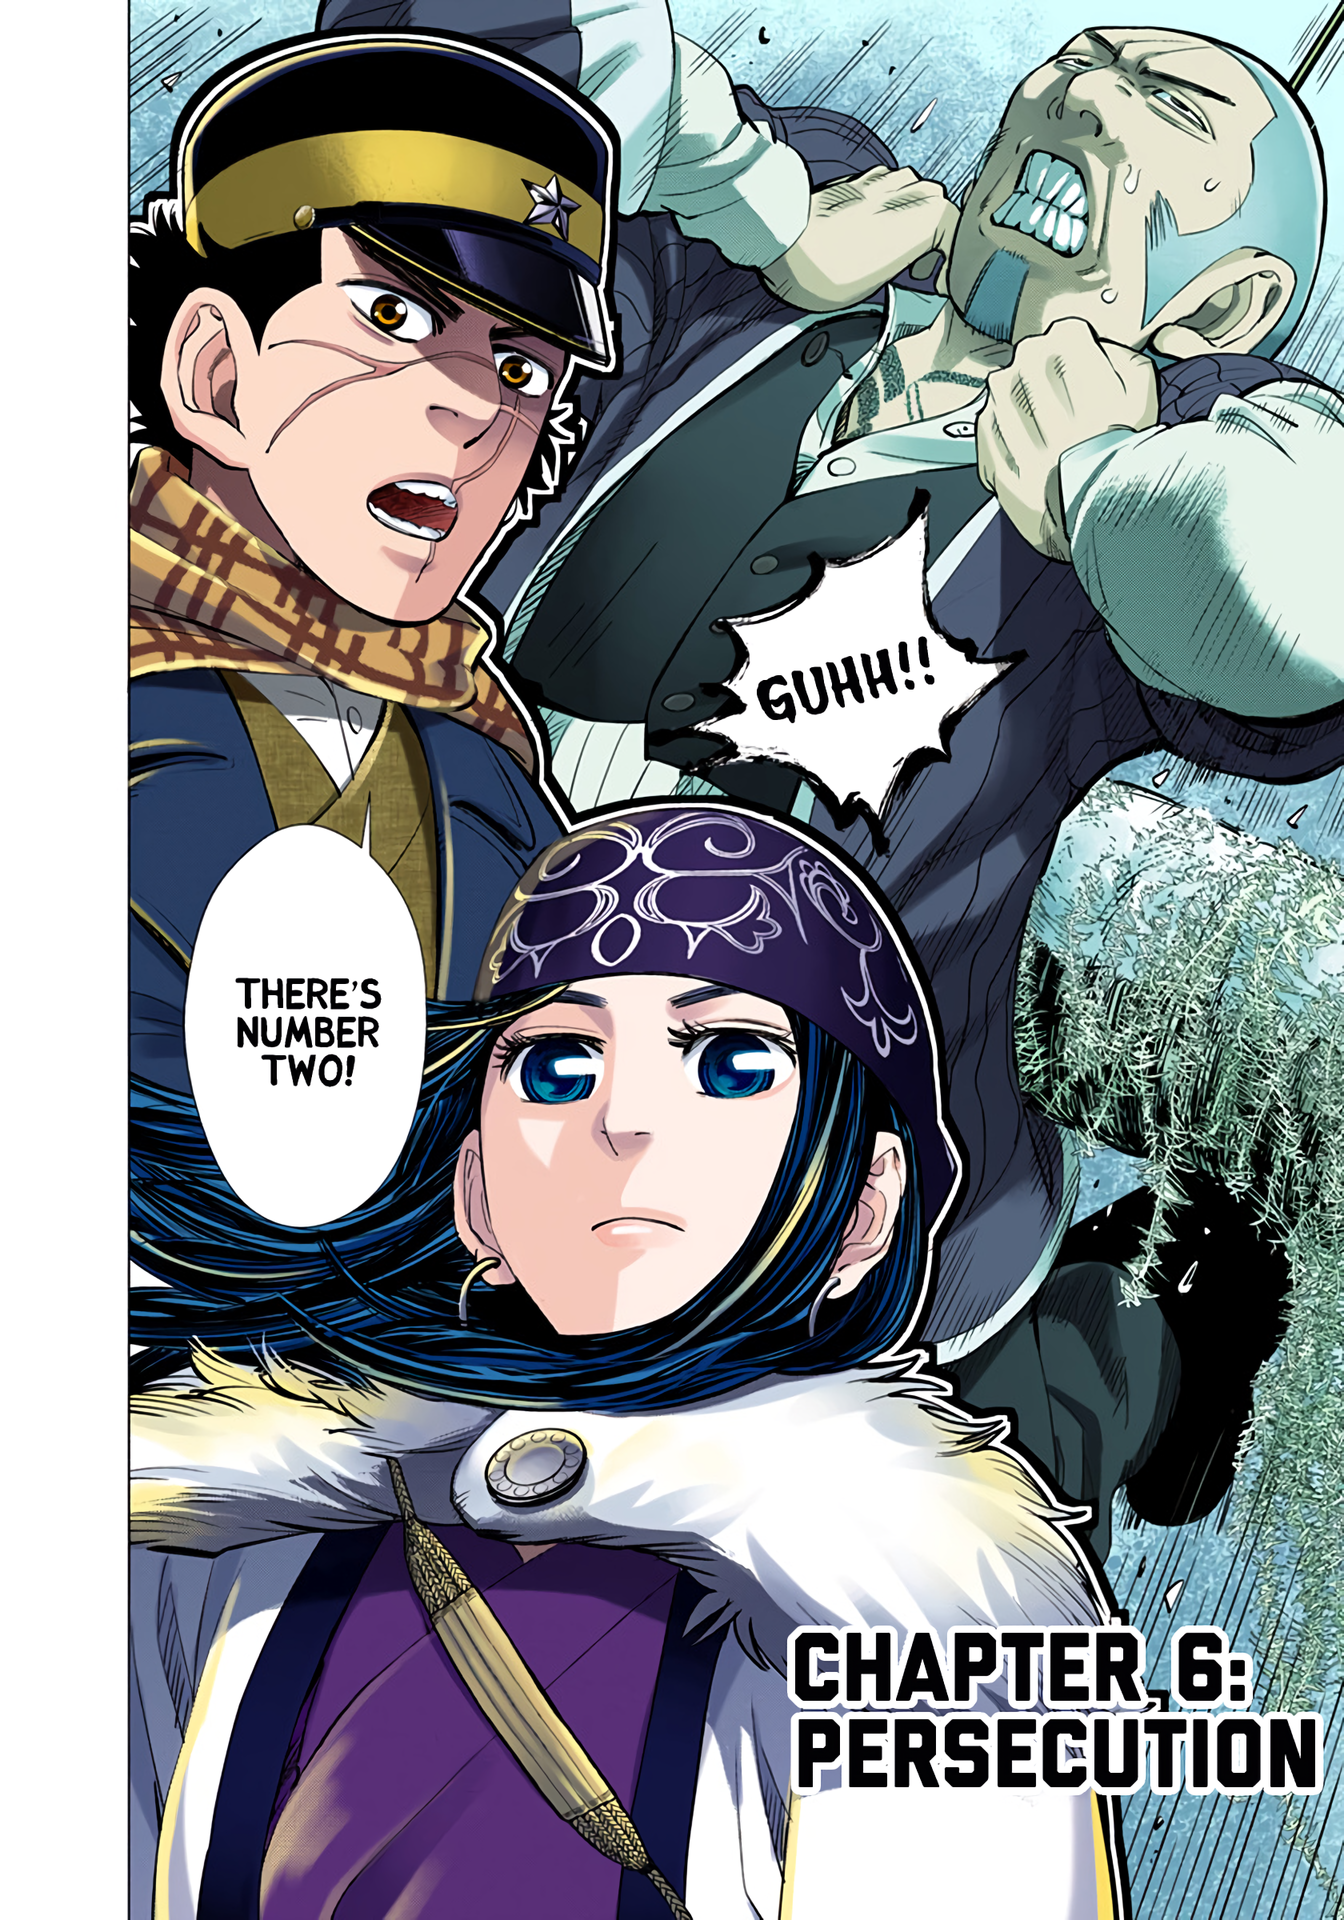 Golden Kamuy - Digital Colored Comics Vol.1 Chapter 6: Persecution - Picture 2